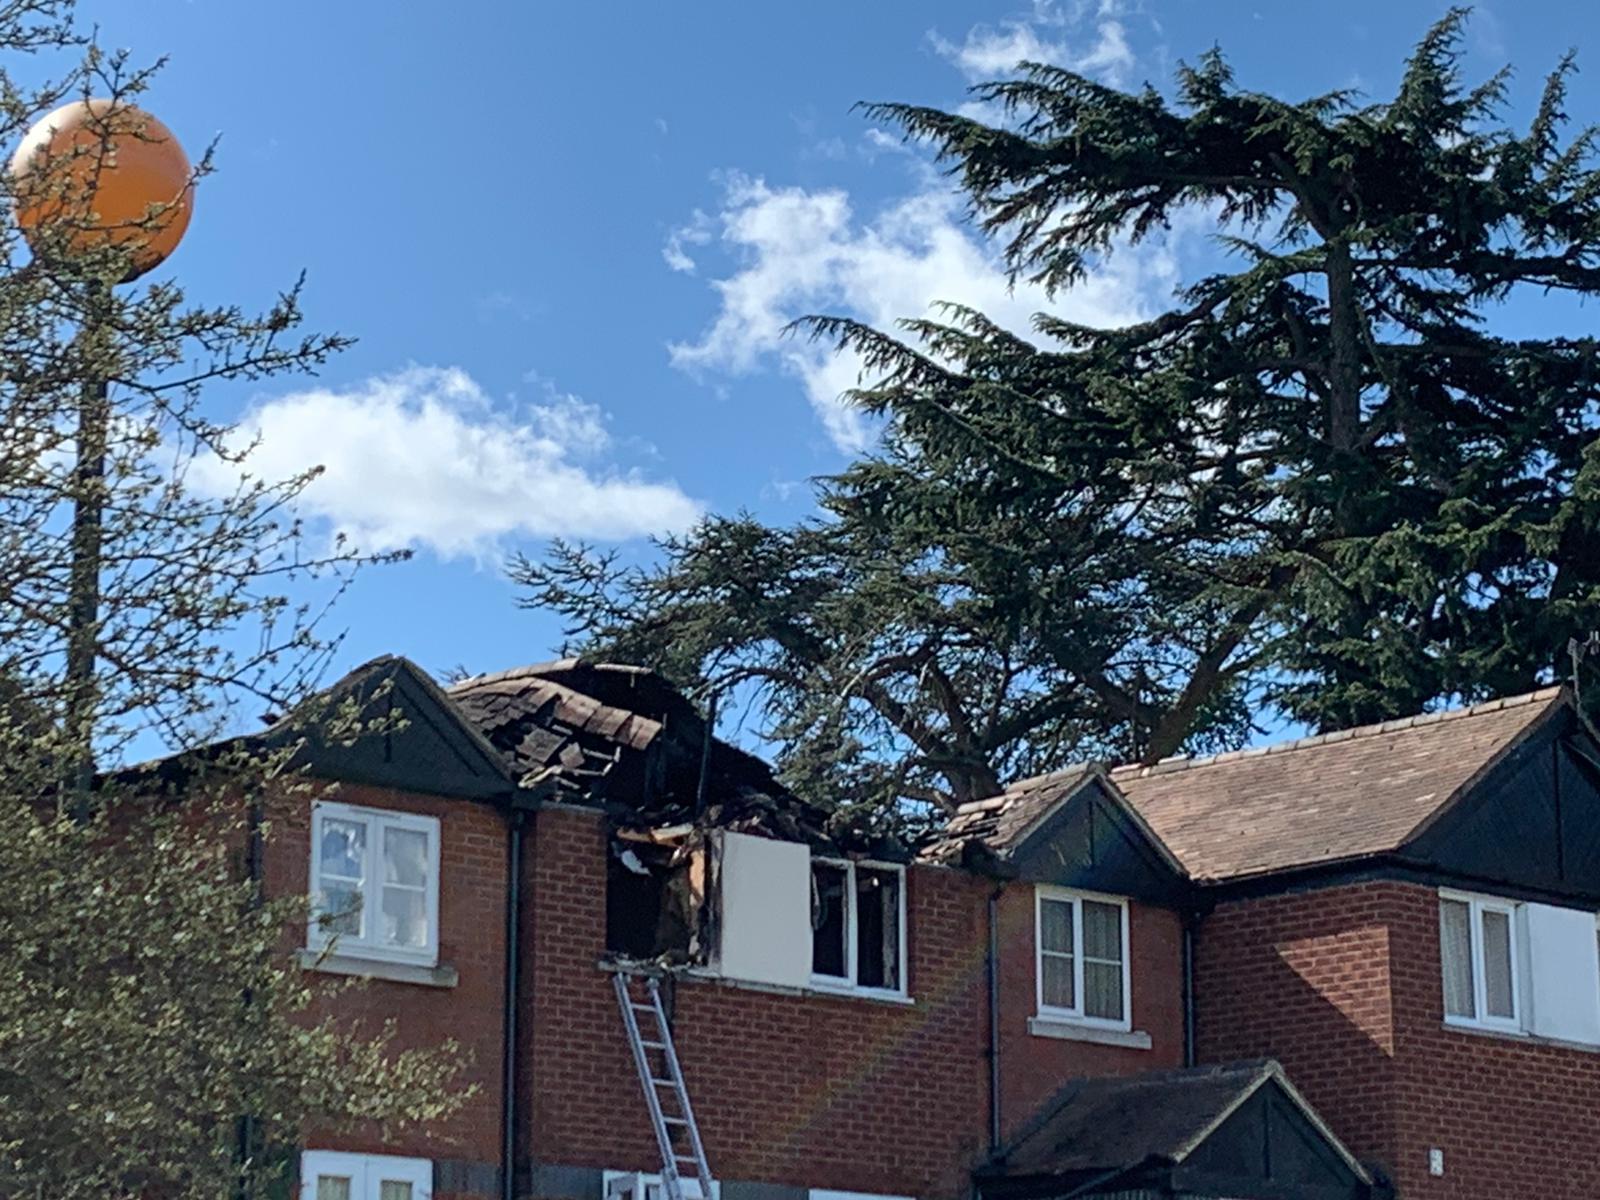 Houses faced severe damage from the fire (Photo: Nathan Louis)